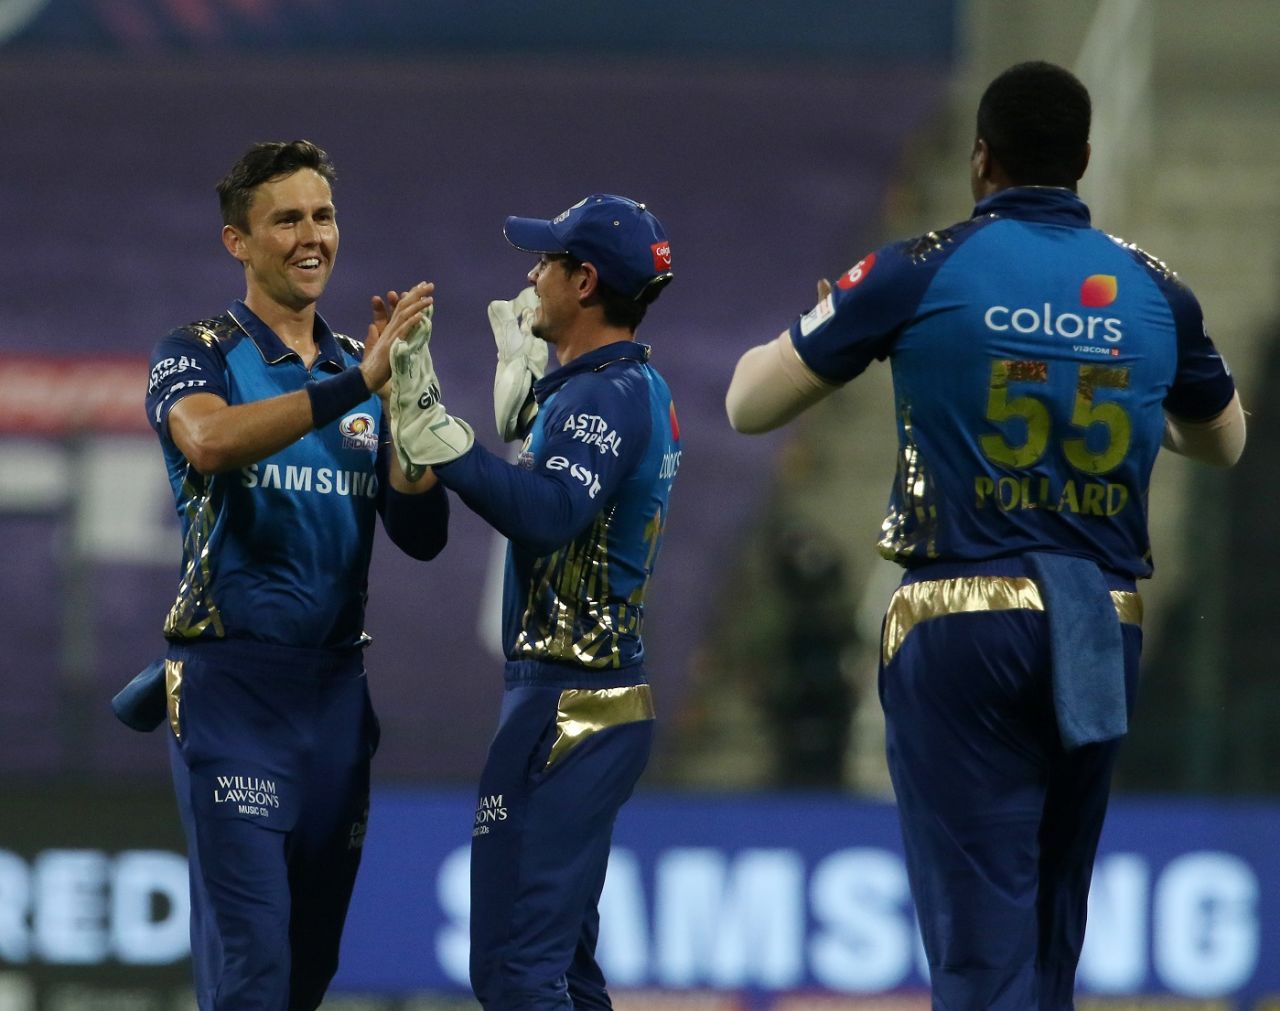 Trent Boult struck off the second ball of the innings, Mumbai Indians vs Rajasthan Royals, IPL 2020, Abu Dhabi, October 6, 2020